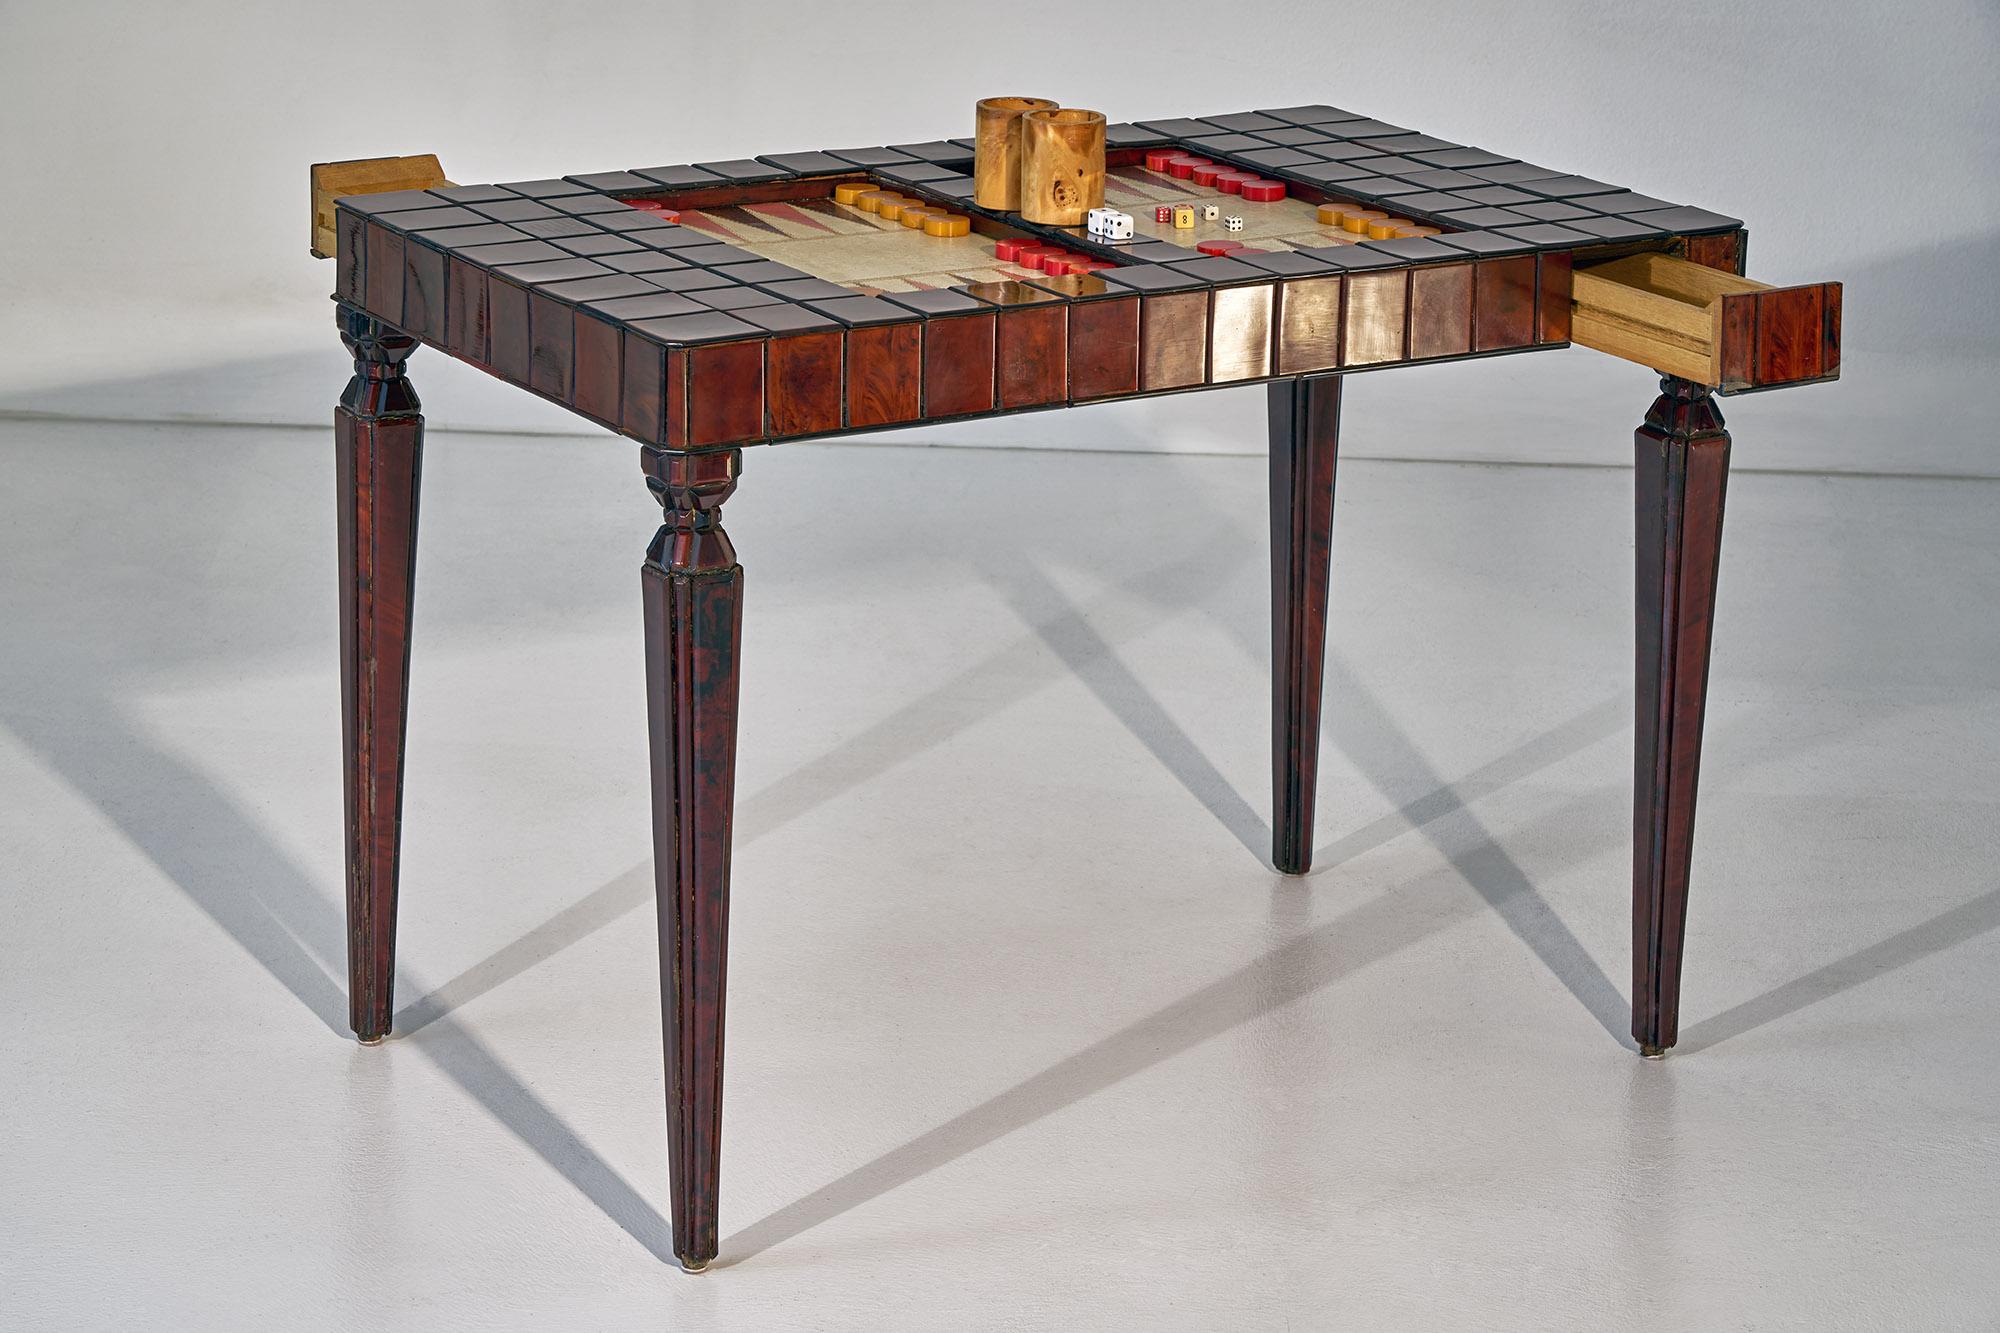 This Backgammon table is of a very rare form and fabrication made for the former Ziegfeld Girl and actress Jean Howard.  Howard began her career with Ziegfeld and was subsequently signed to MGM where she appeared in several films in the 1930s and no